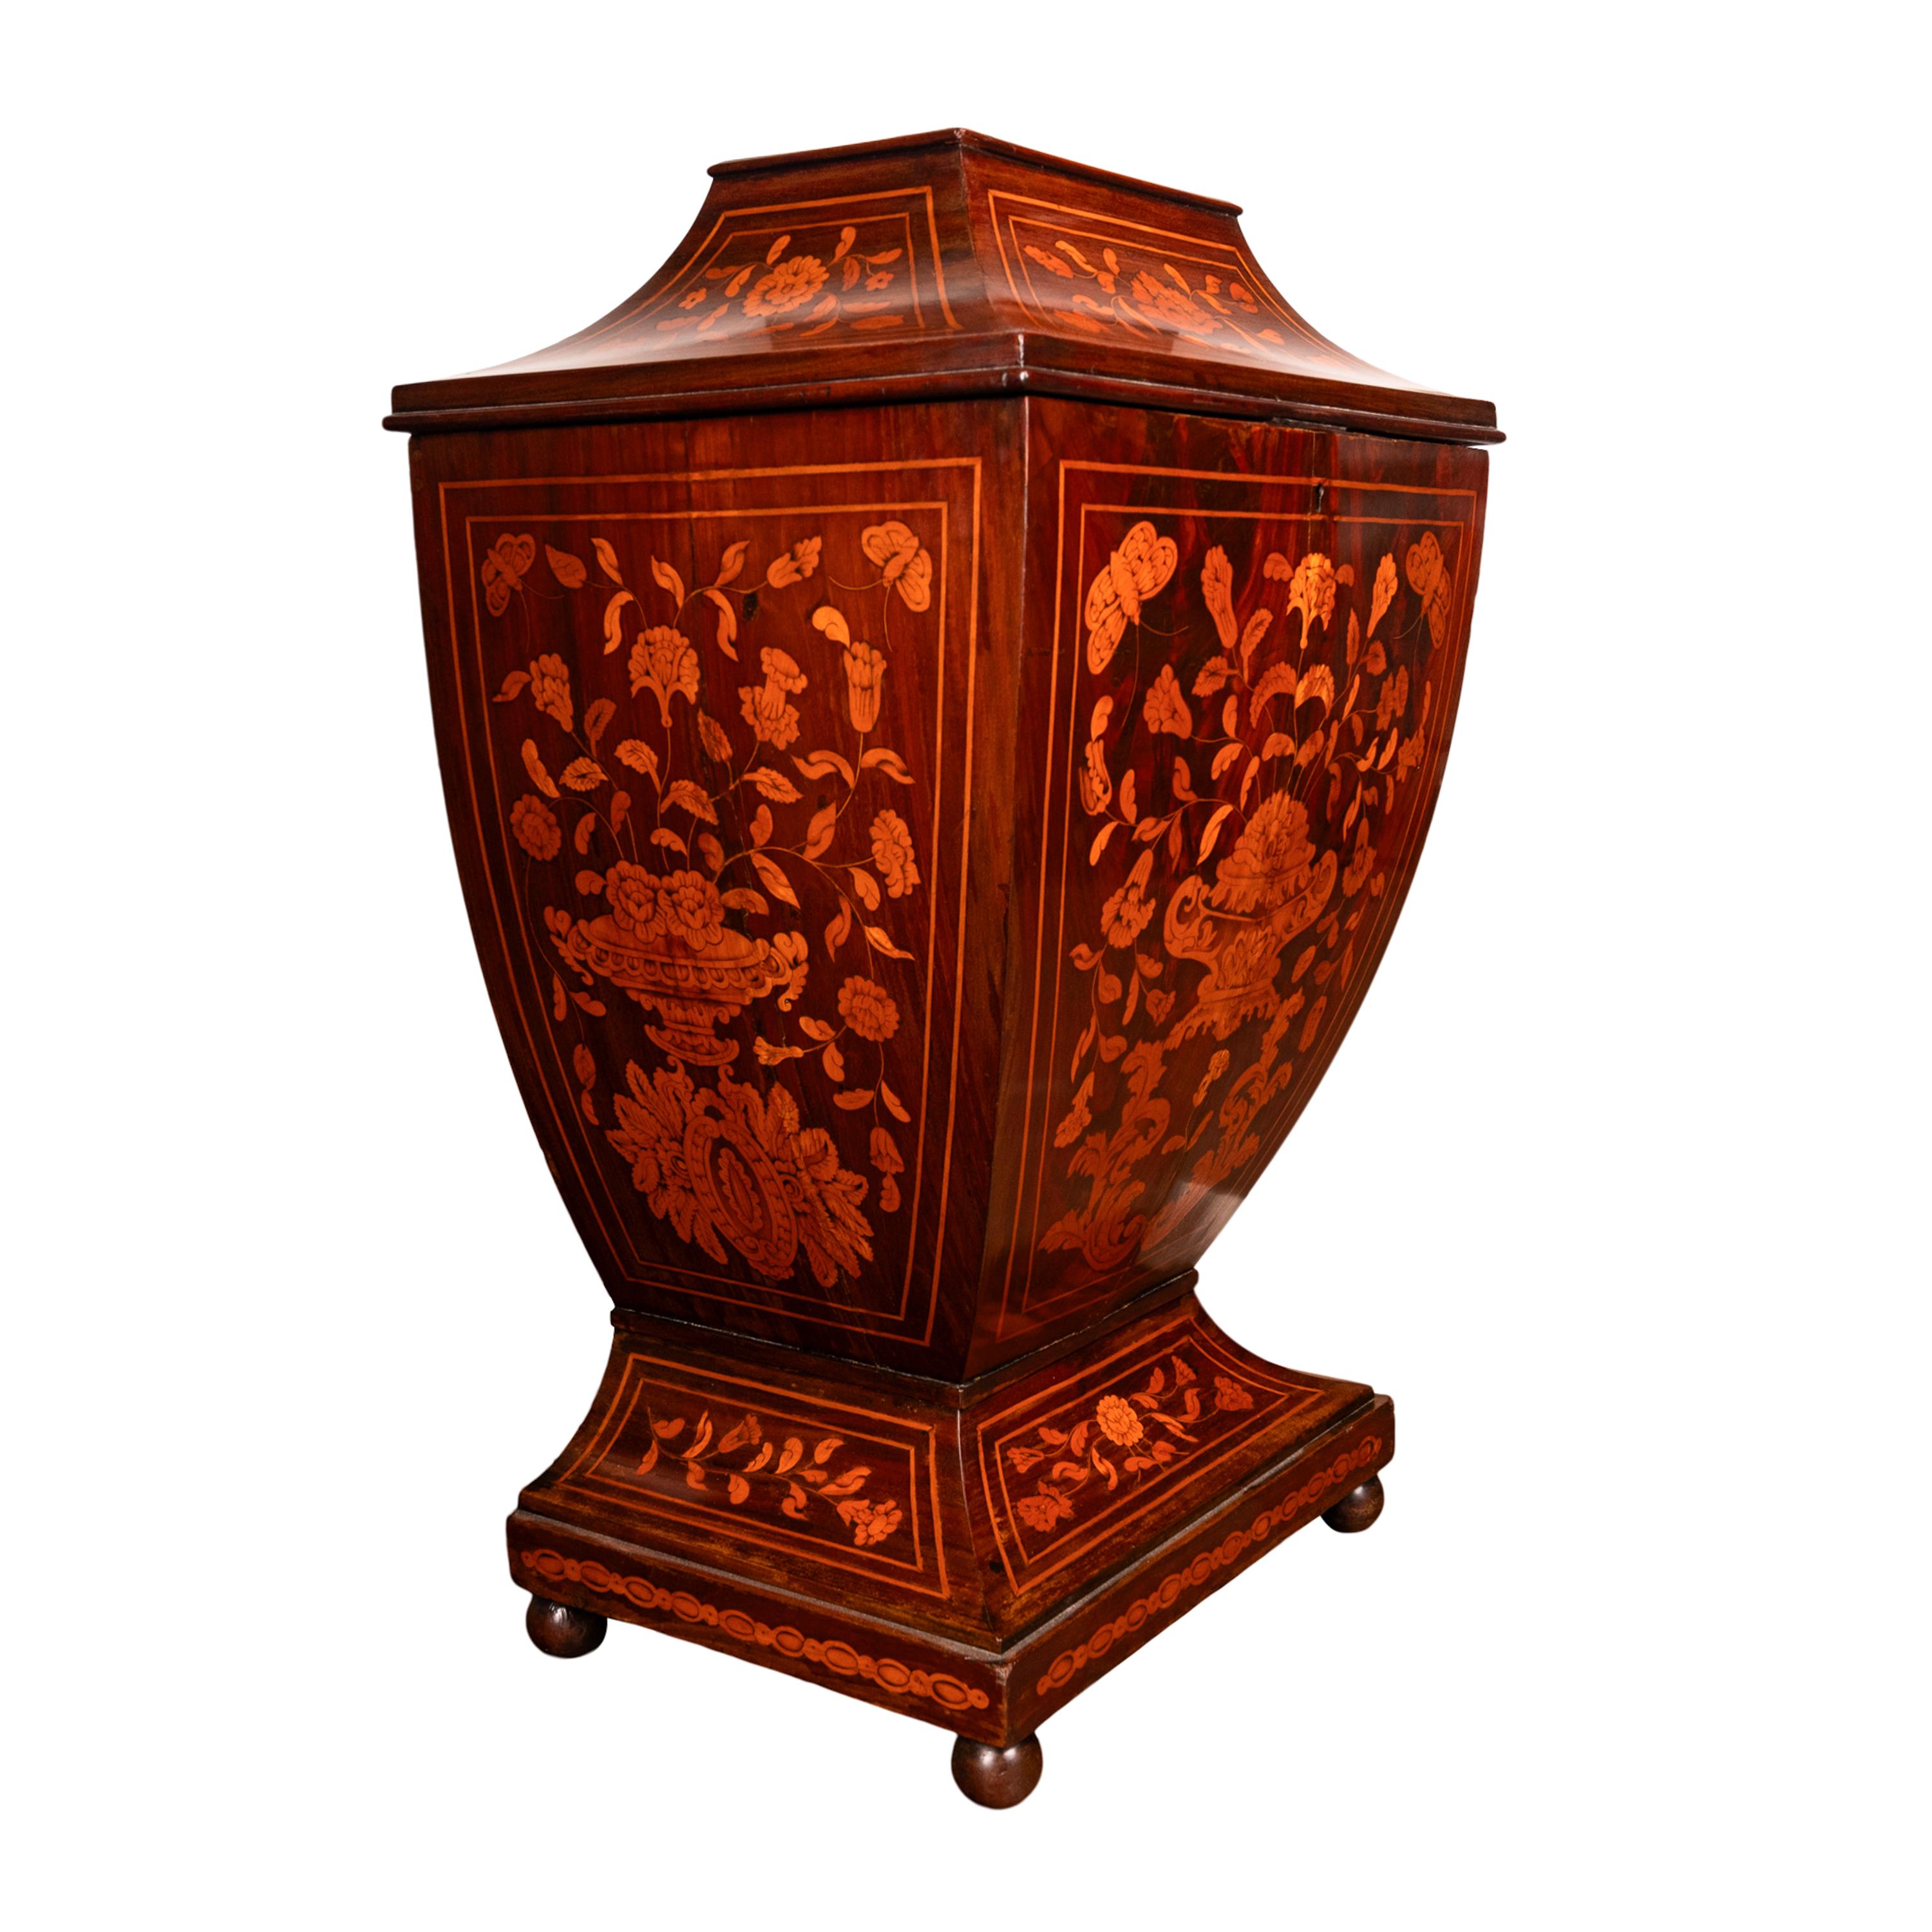 Antique 18th Century Dutch Marquetry Bombe Shaped Wine Cellerette Cooler 1760 In Good Condition For Sale In Portland, OR